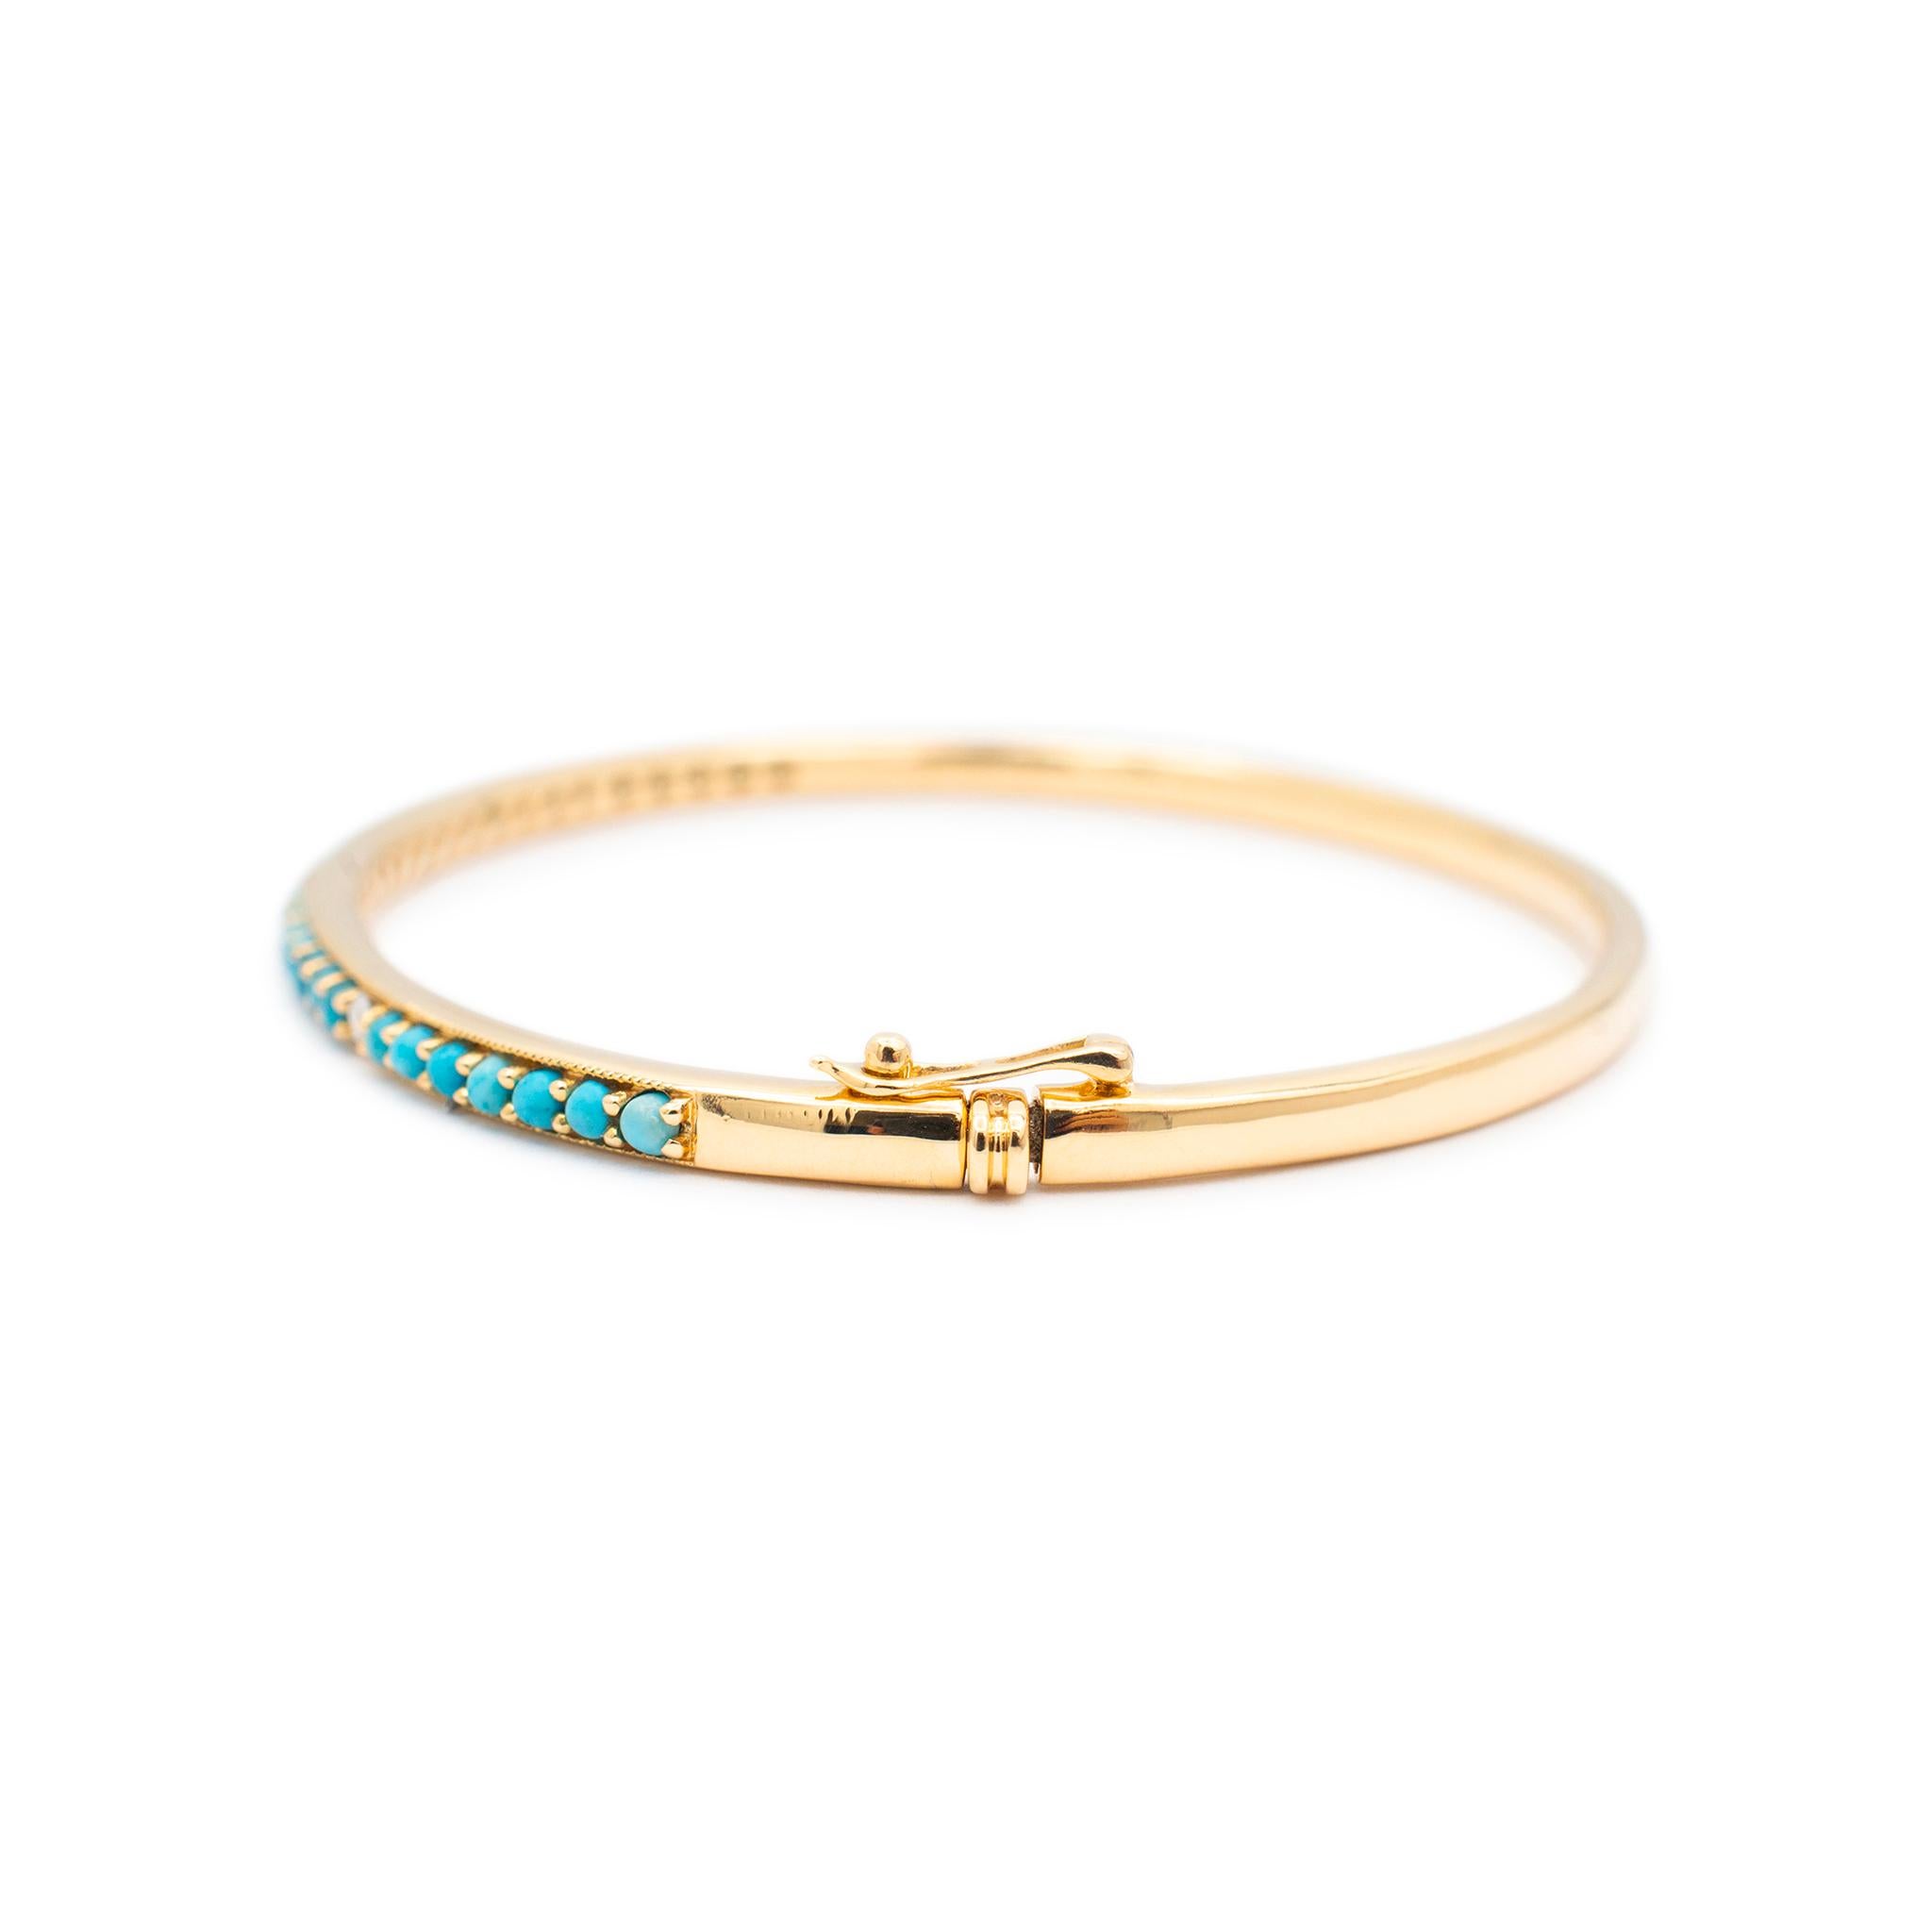 Gender: Ladies

Metal Type: 14K Yellow Gold

Length: 6.00 inches

Width: 2.90 mm

Weight: 11.03 grams

Ladies  14K yellow gold diamond and turquoise bangle bracelet. The metal was tested and determined to be 14K yellow gold. Engraved with 